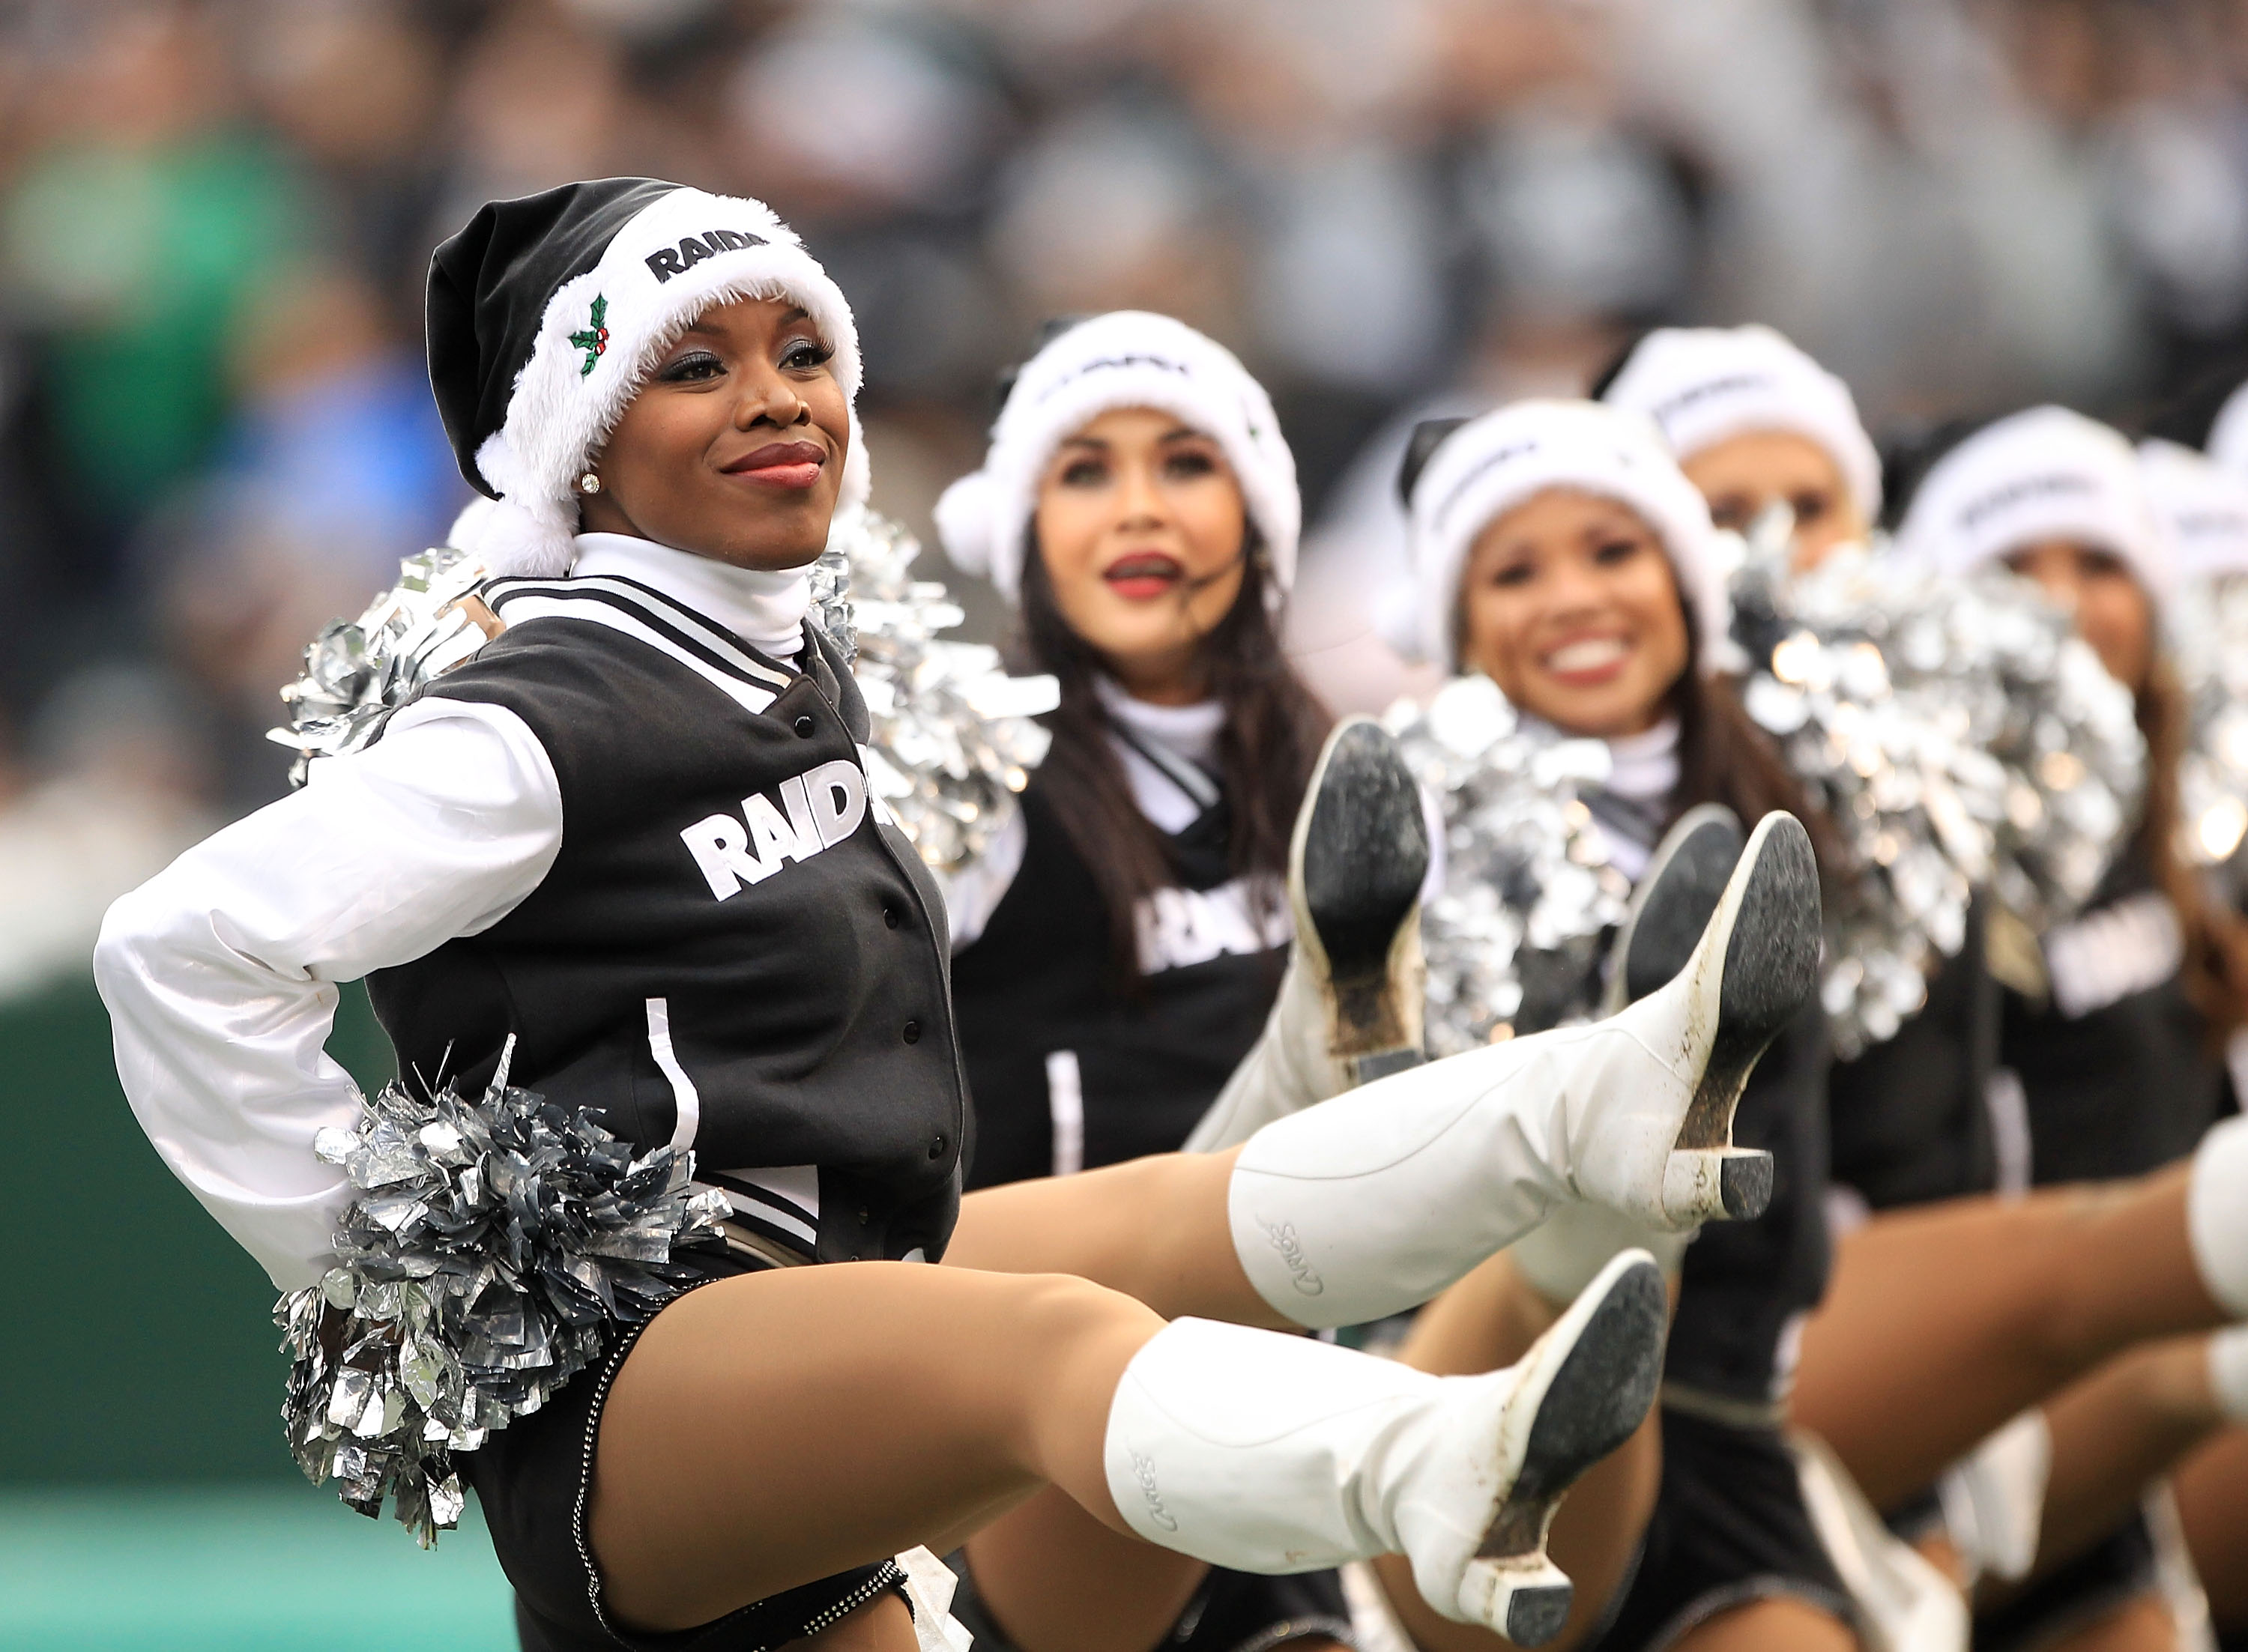 OAKLAND, CA - DECEMBER 19:  The Raiderettes cheer during the Denver Broncos game against the Oakland Raiders at Oakland-Alameda County Coliseum on December 19, 2010 in Oakland, California.  (Photo by Ezra Shaw/Getty Images)